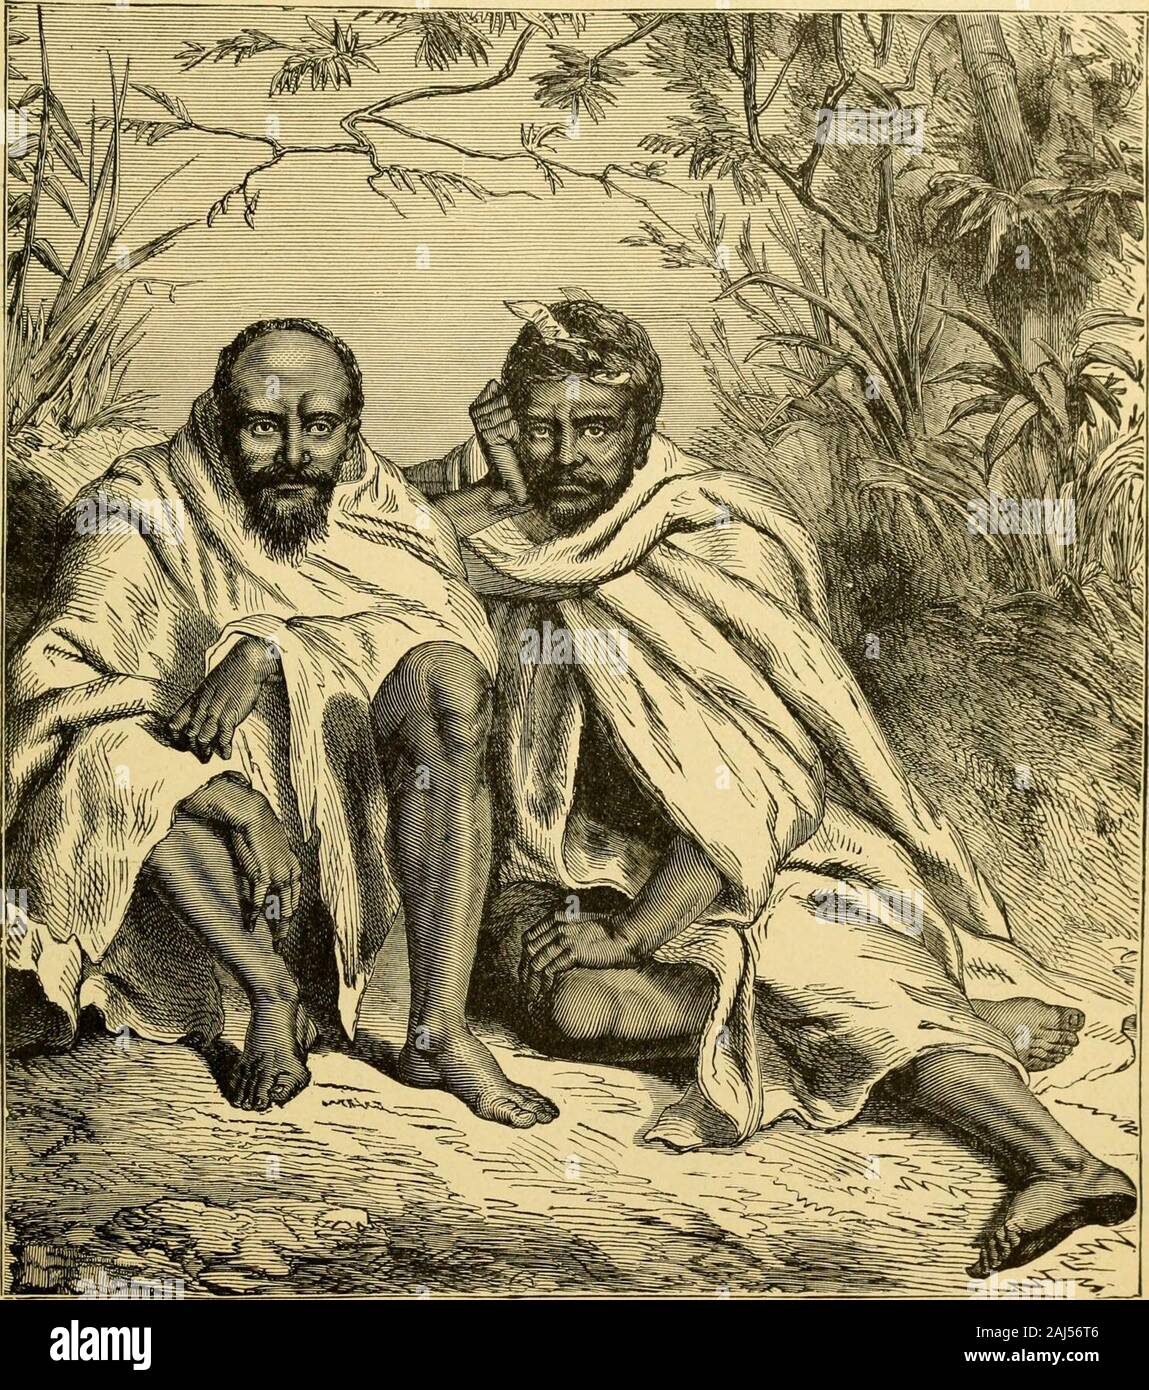 Ridpath's history of the world; being an account of the ethnic origin, primitive estate, early migrations, social conditions and present promise of the principal families of men .. . The derivation of these fromthe Mongoloid stem has   , . 0 , Distribution already been noticed in a and tribes of the ,i , x Old Dravidians. former chapter. In gener-al, the peoples of this stock are found inthe southern part of the peninsula, butbranches of the family extend as farnorth as Chuta-Nagpur. They are,doubtless, the oldest race in India. Mostof the Dravidian tribes are associatedin tolerably compact se Stock Photo